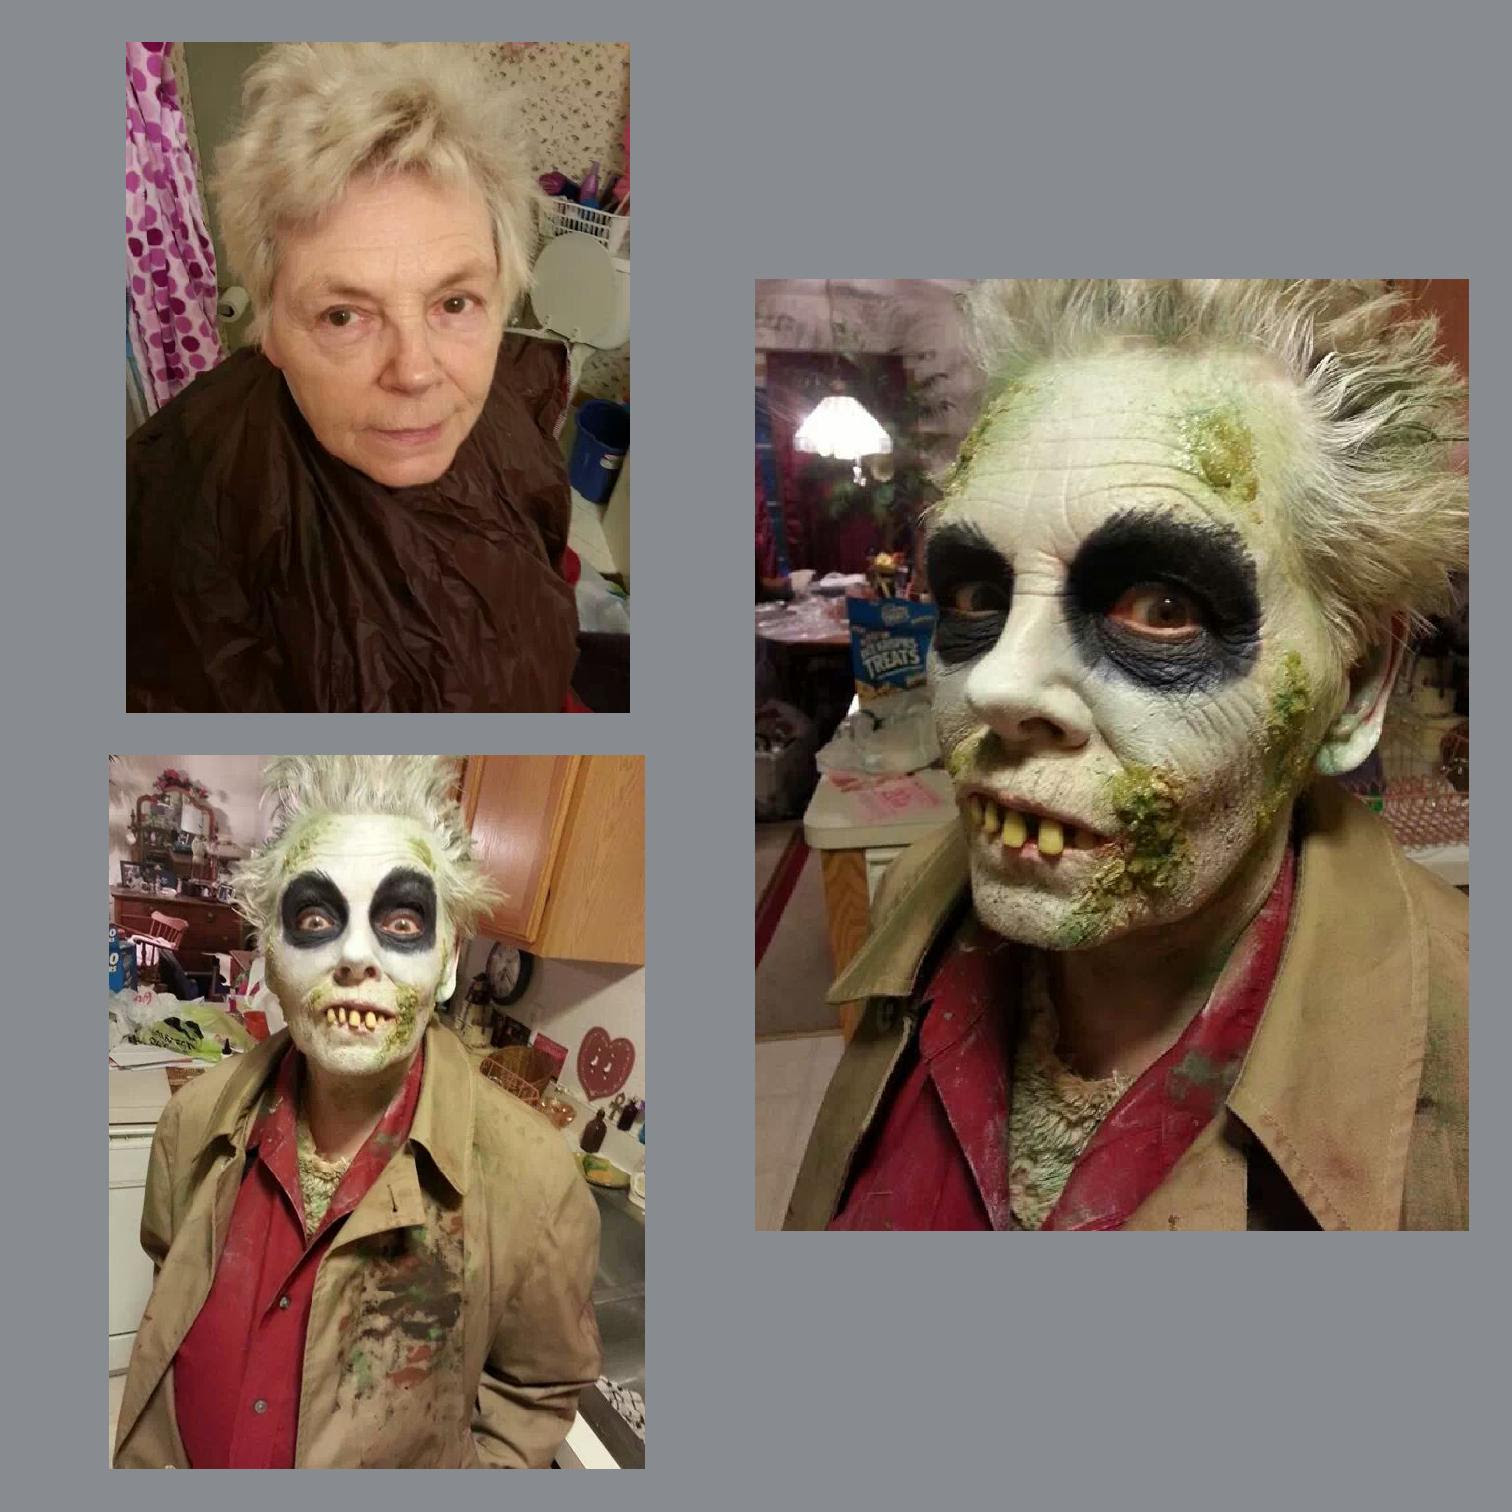 By entering your email address you agree to receive emails from shmoop and verify that you are over the age of 13. Beetlejuice Makeup I Did Timburton